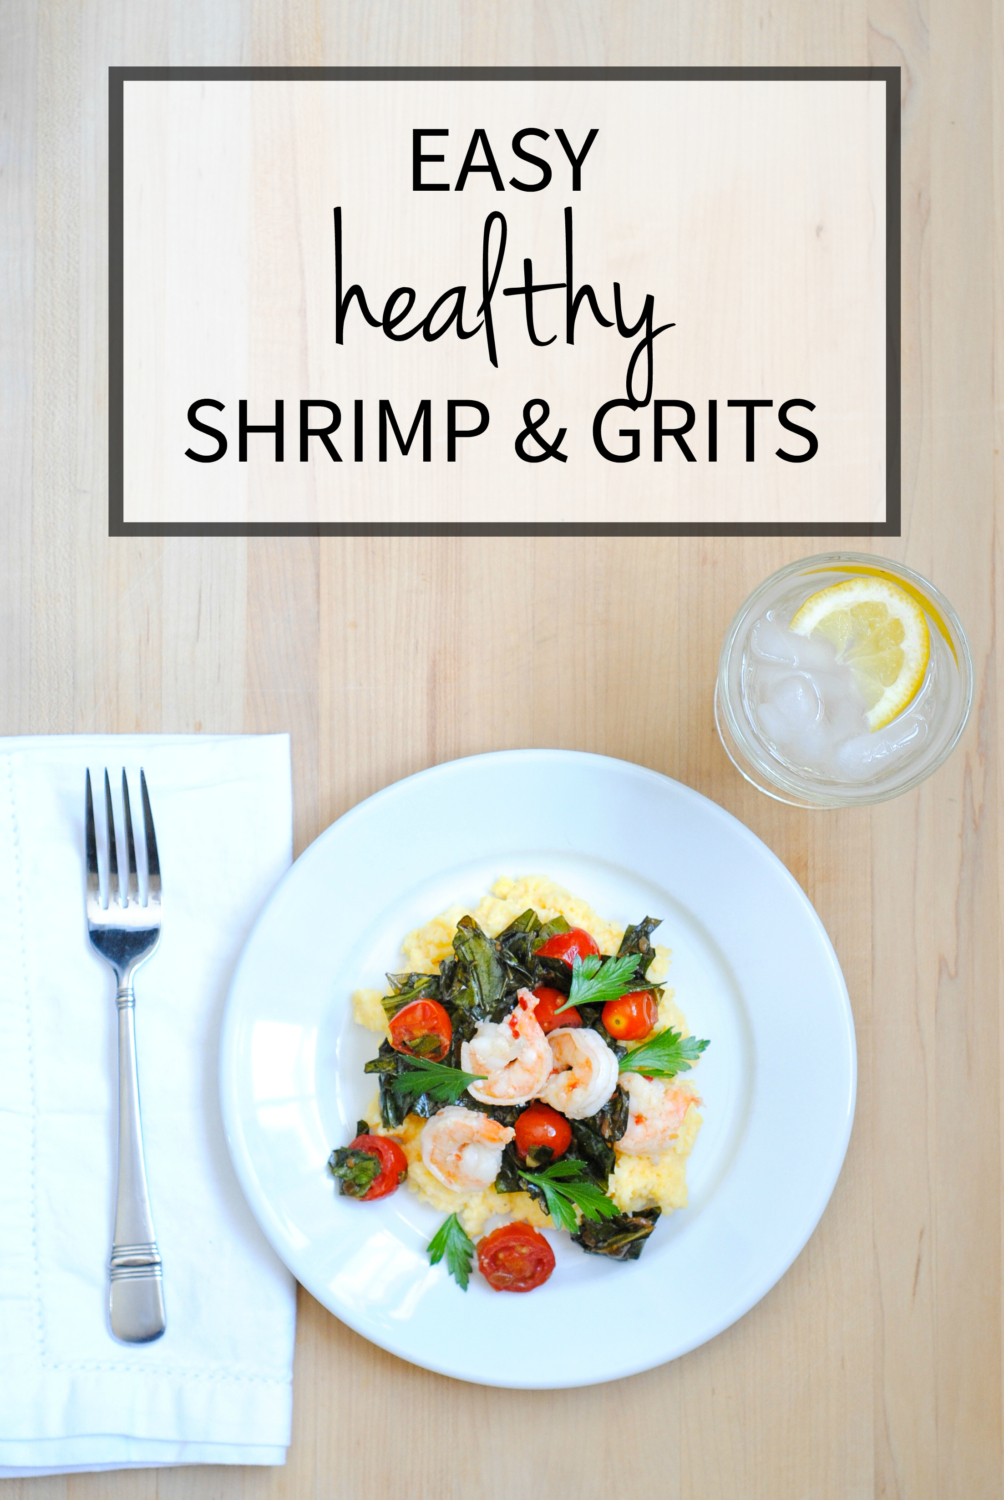 Healthy shrimp and grits recipe with collard greens and tomatoes - super easy and delicious, ready in 30 minutes!